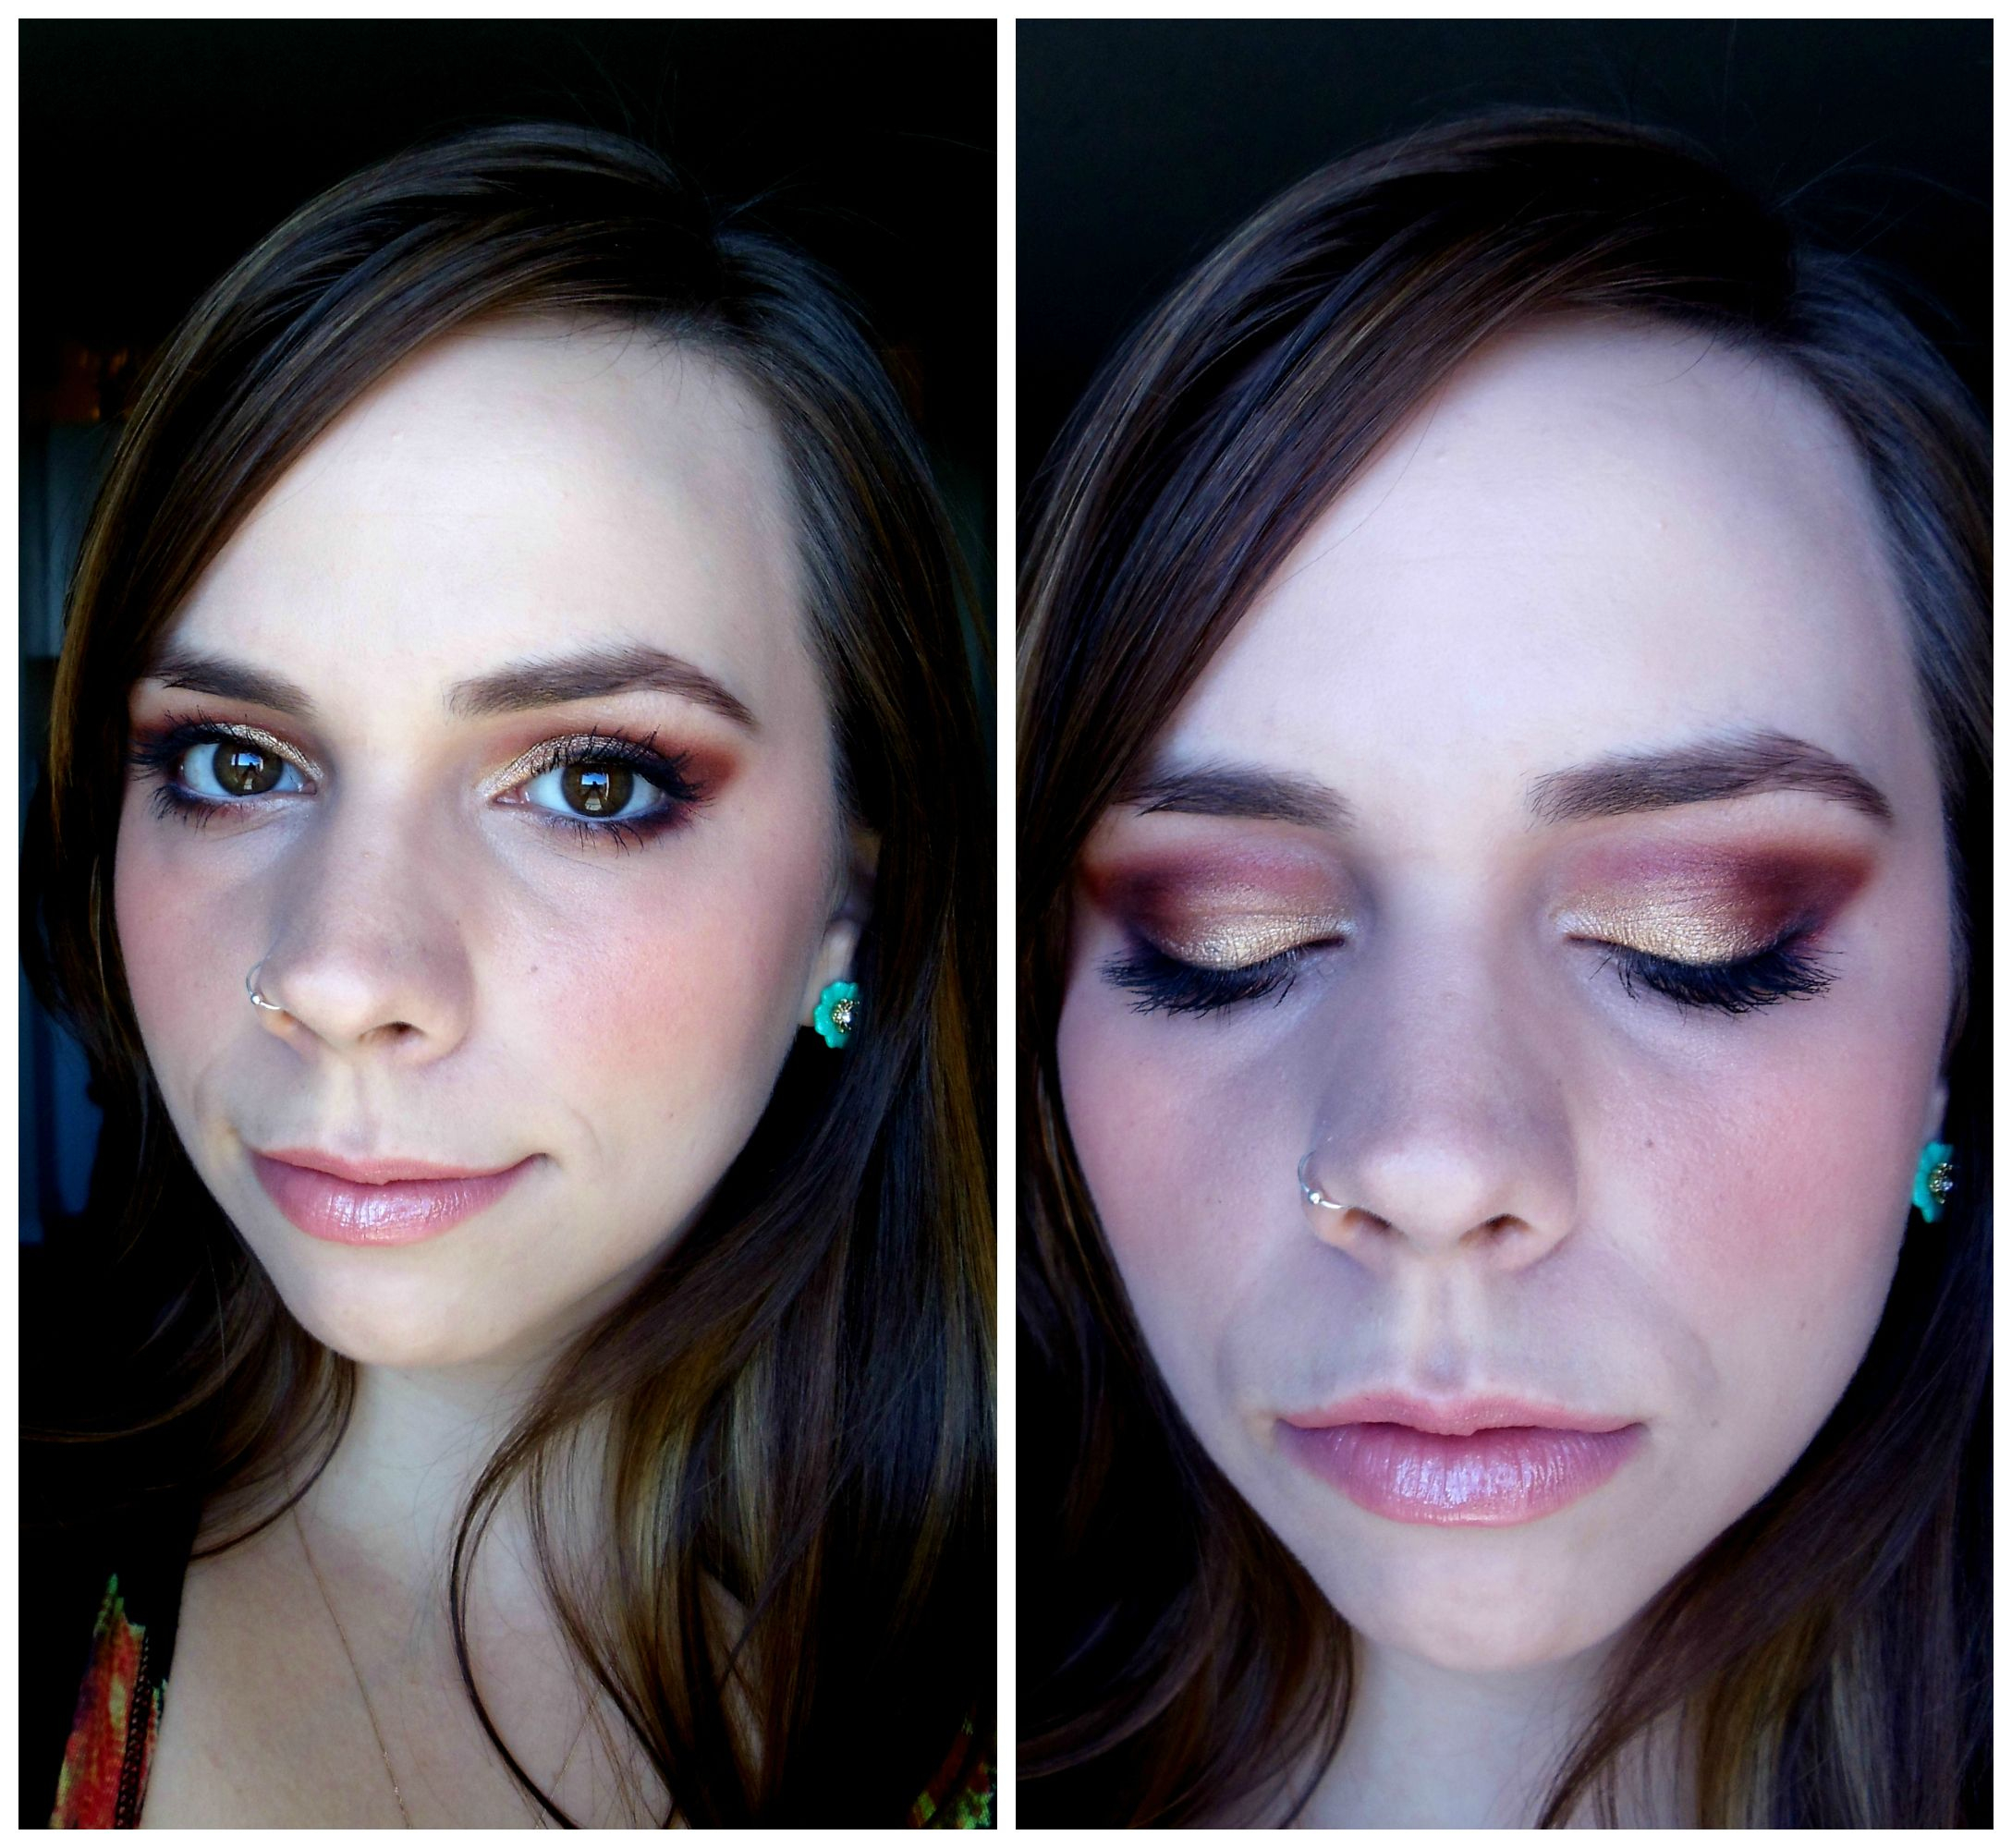 Eye Makeup For Interview Fotd Cranberry Dreams I Applied To Sephora Wearing This Today And